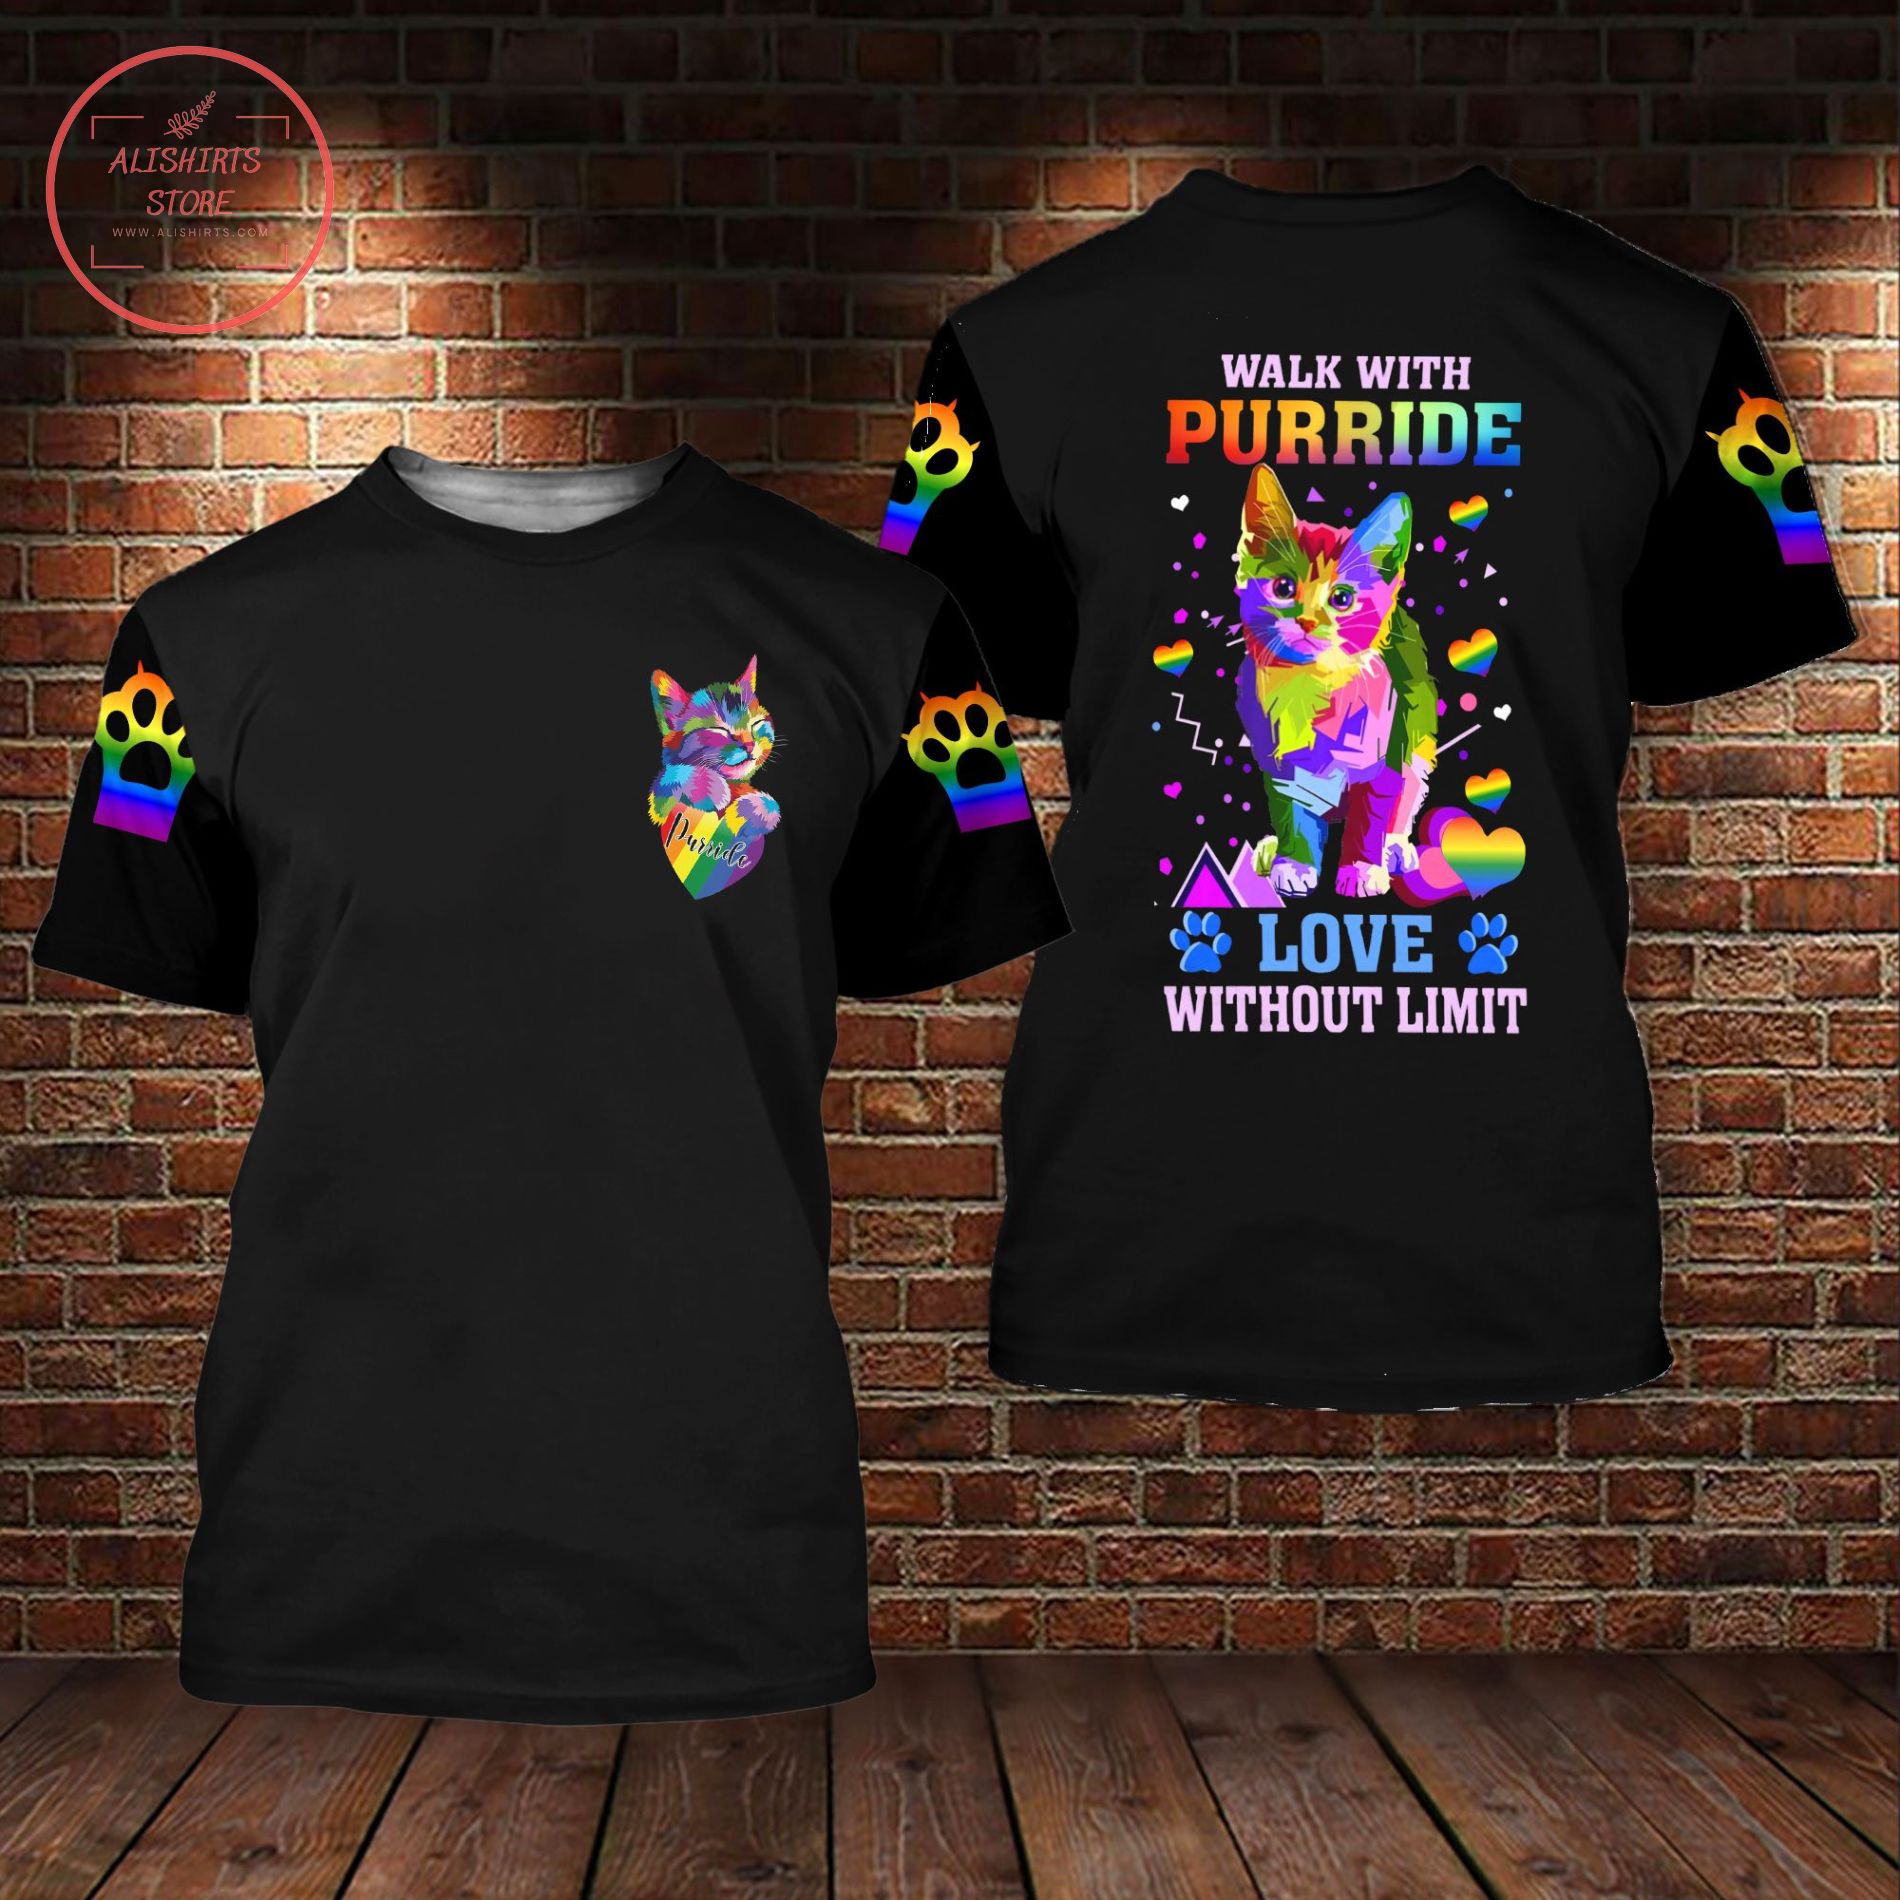 Pride Parade 2021 Lgbt Walk With Purride Love Without Limit 3D All Over Shirts